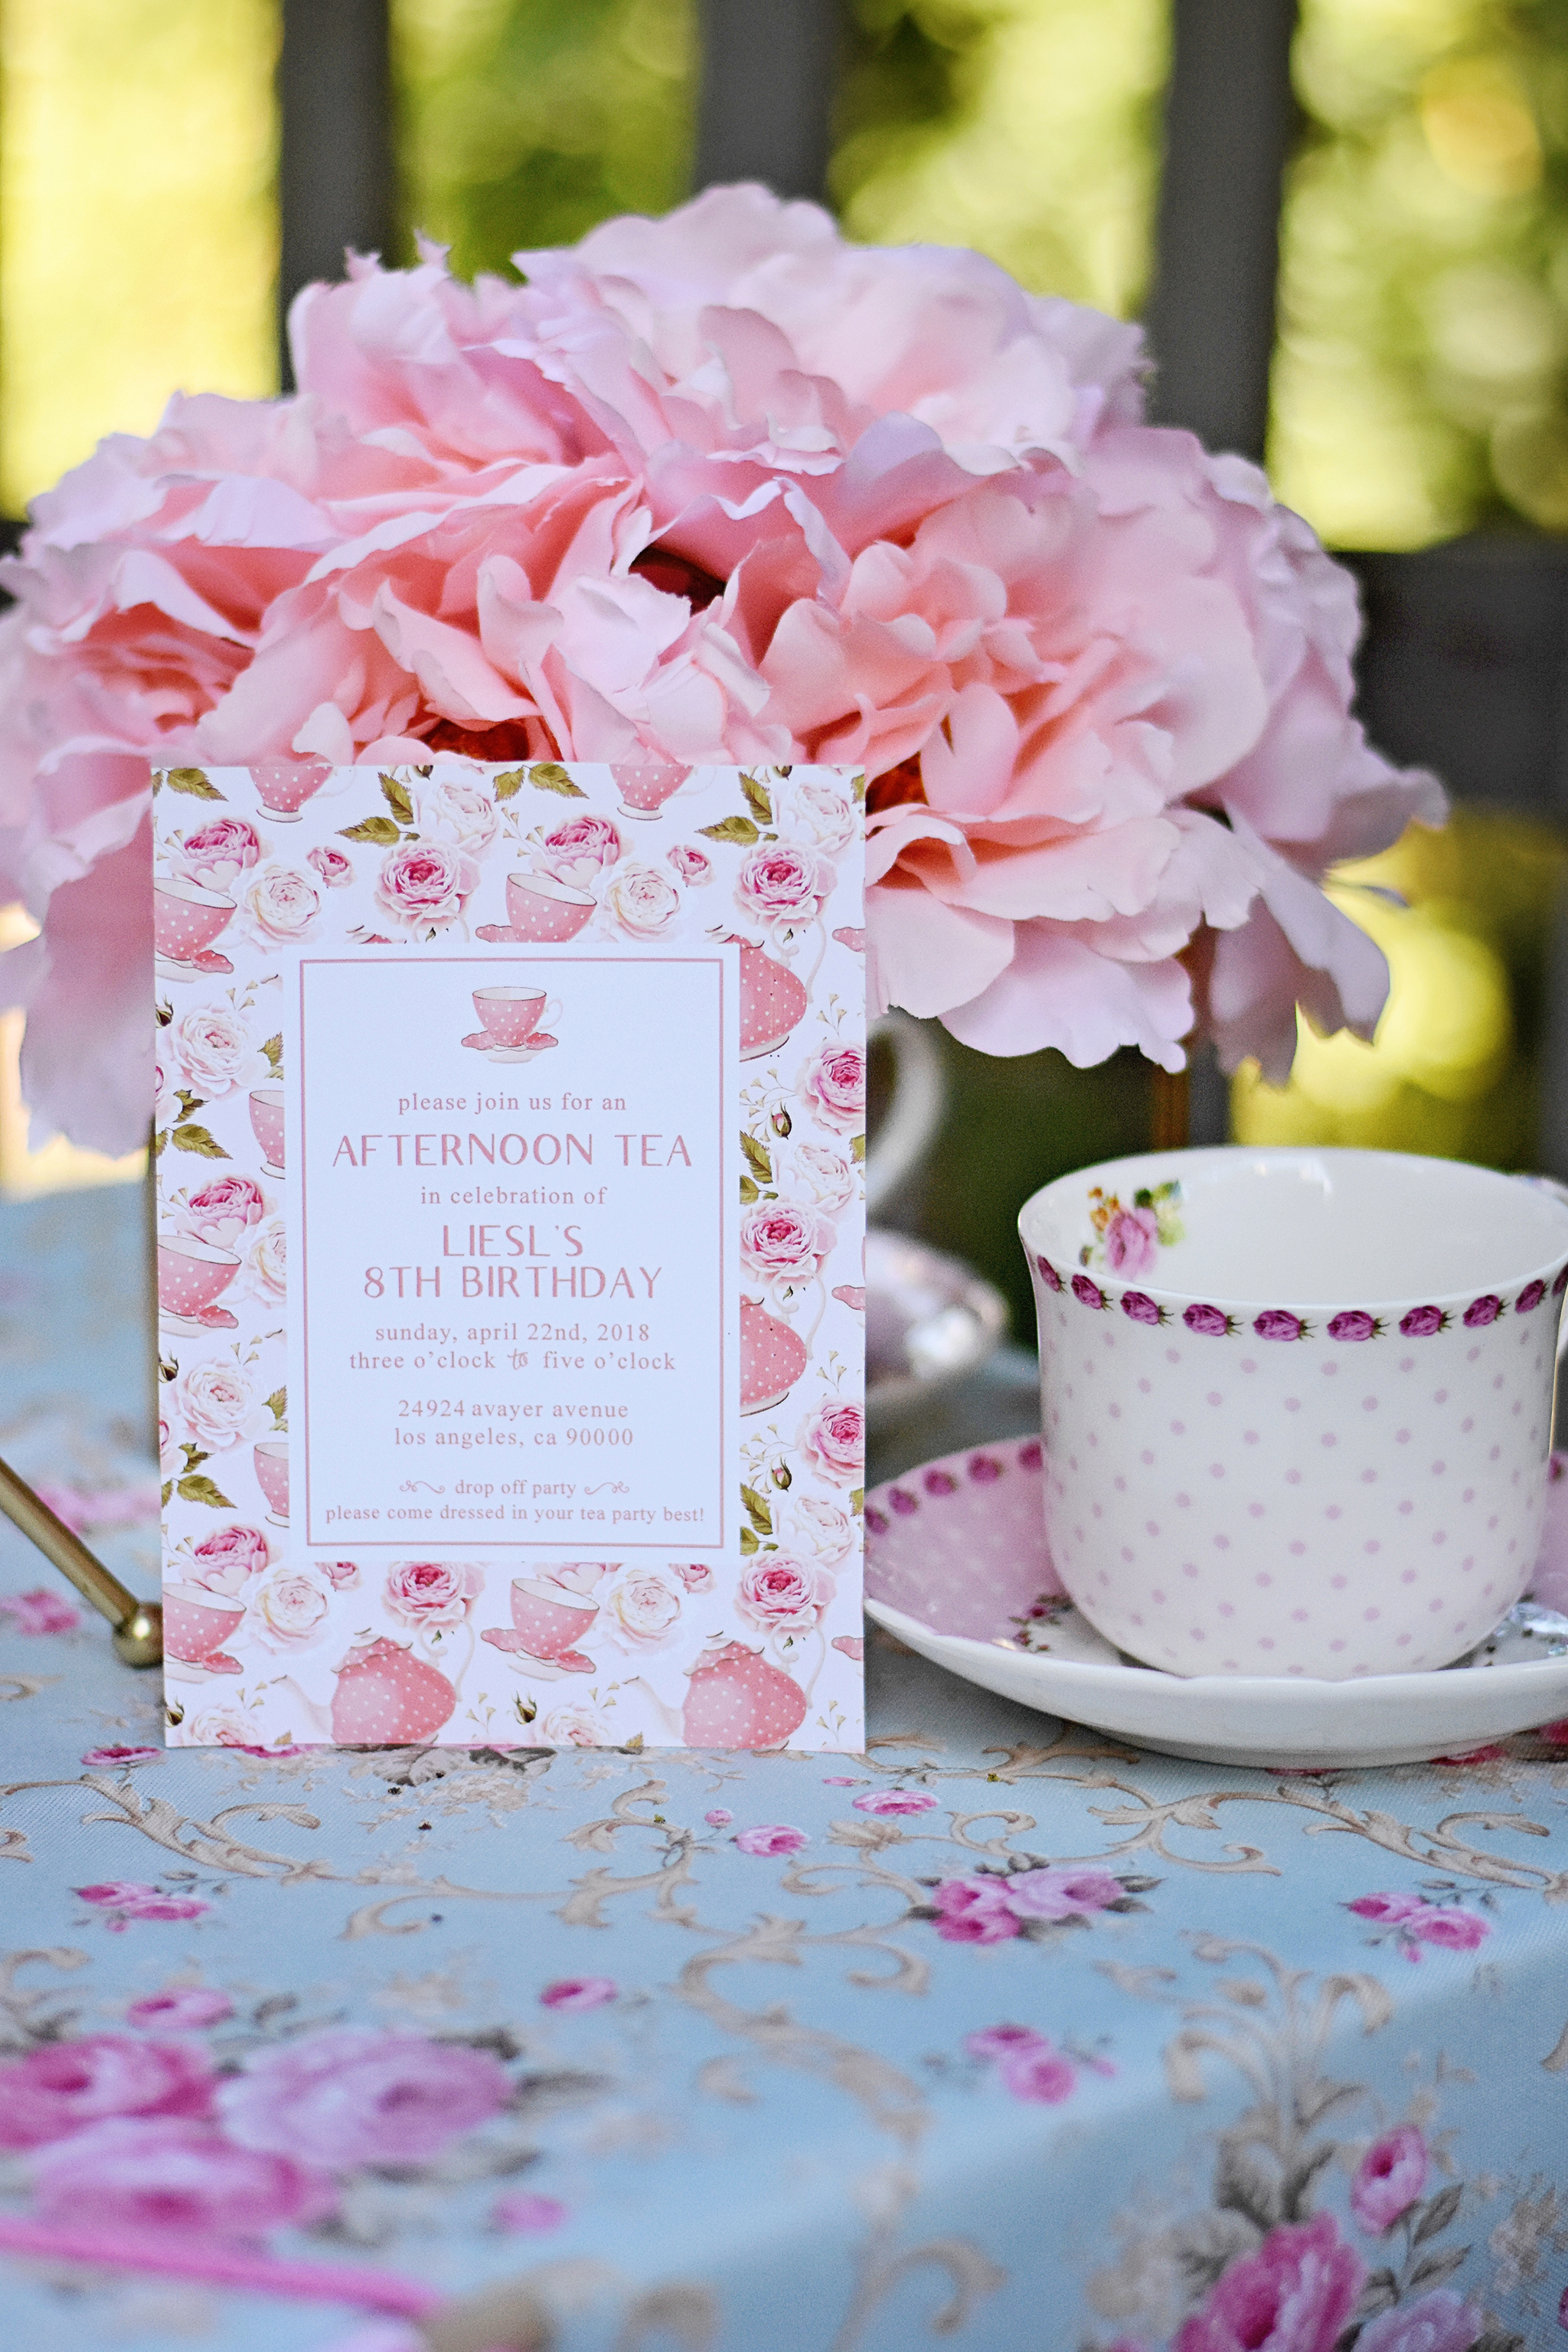 Tea Party invitations let your guests know the dress code!